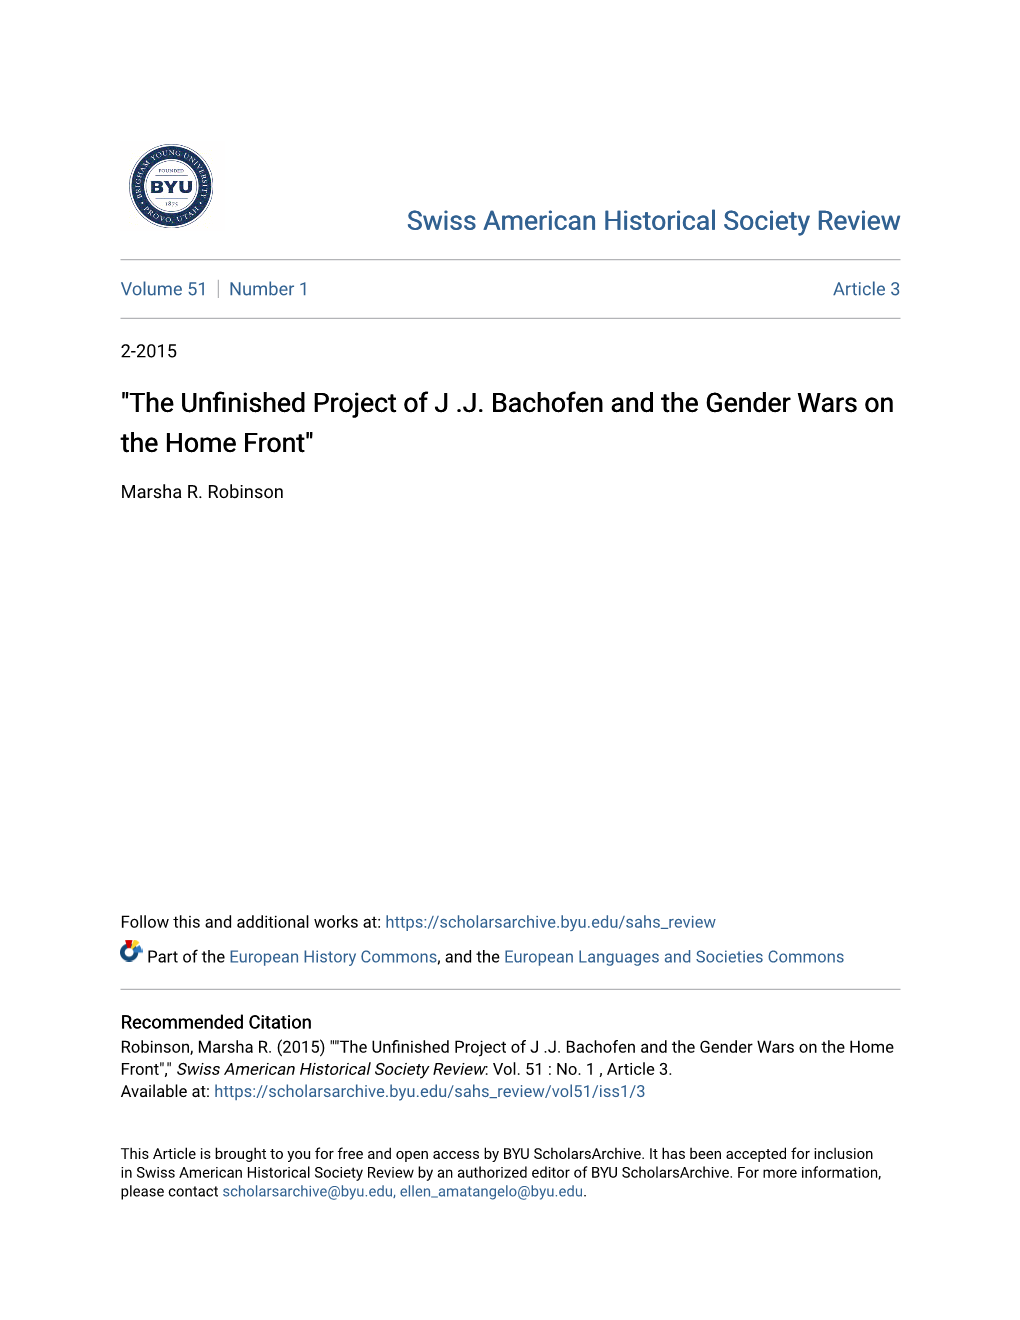 "The Unfinished Project of J .J. Bachofen and the Gender Wars on the Home Front"